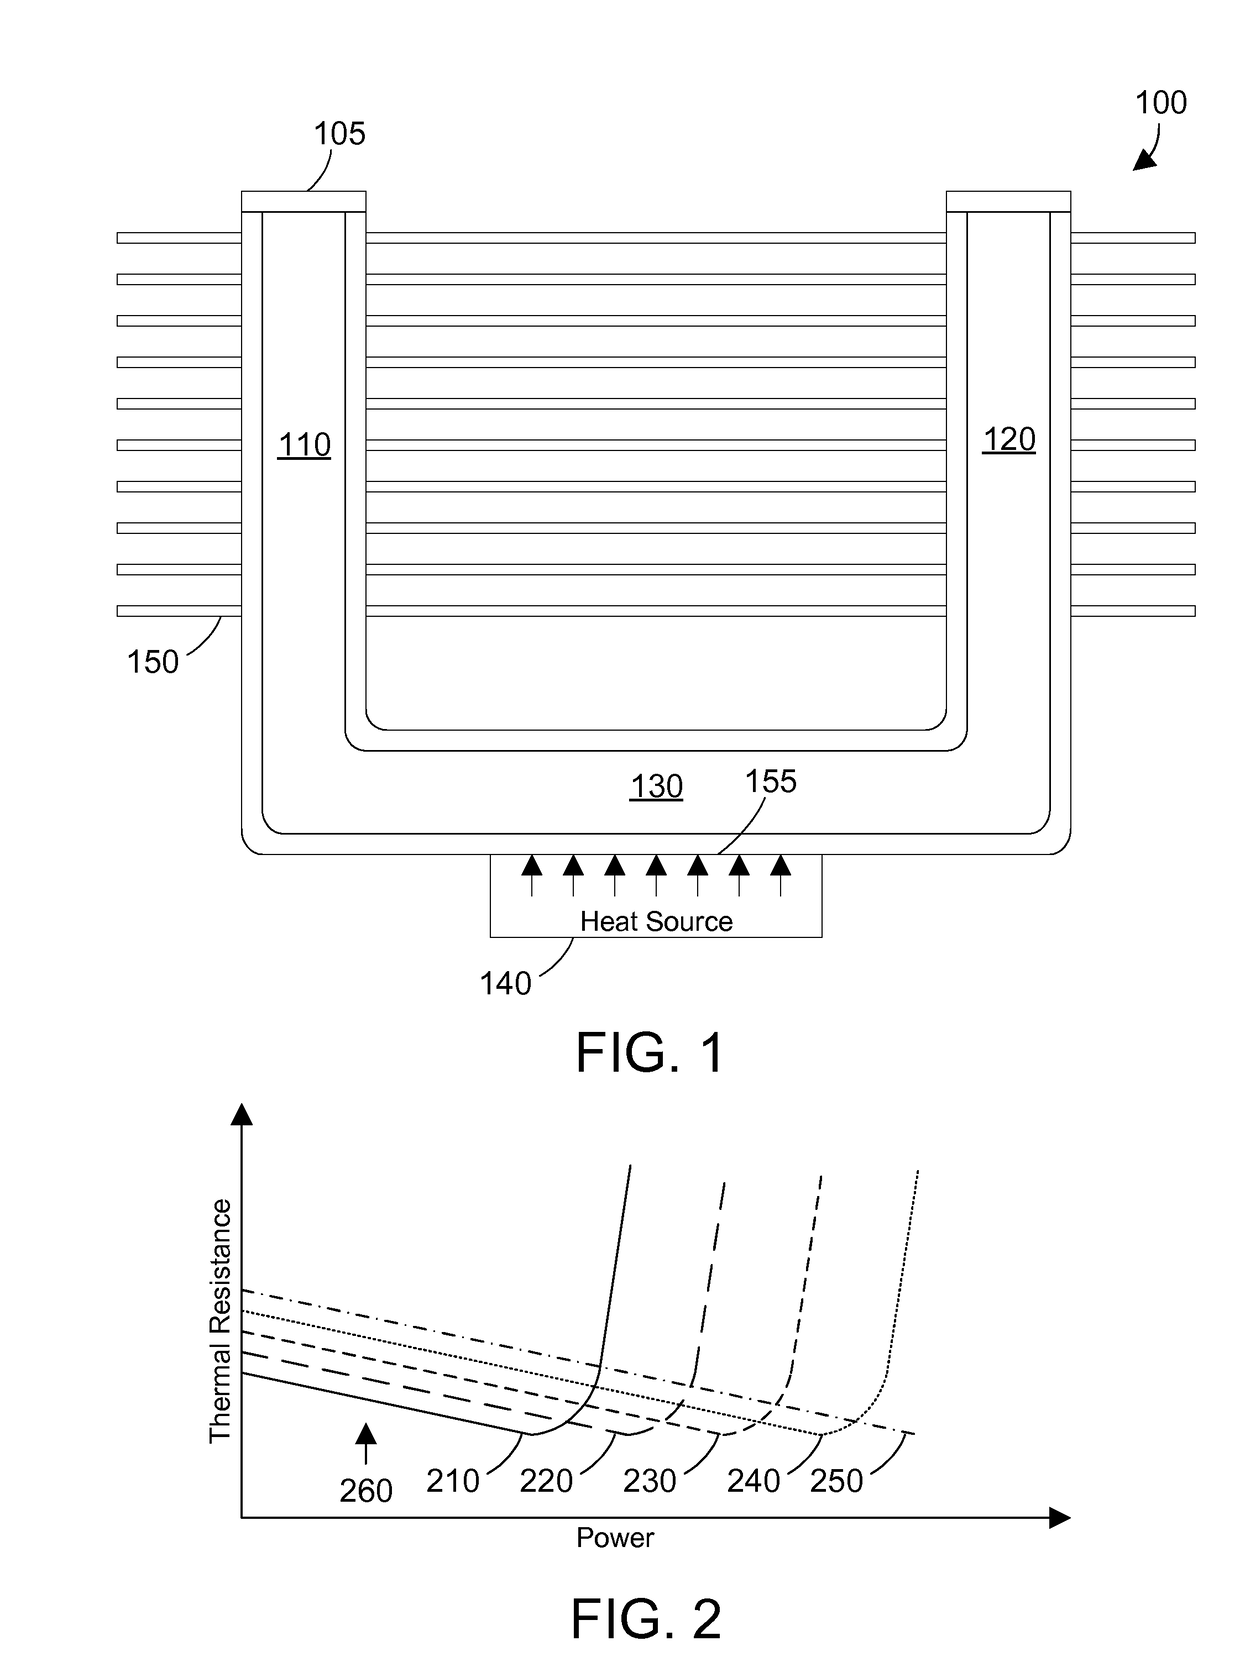 Demand-based charging of a heat pipe